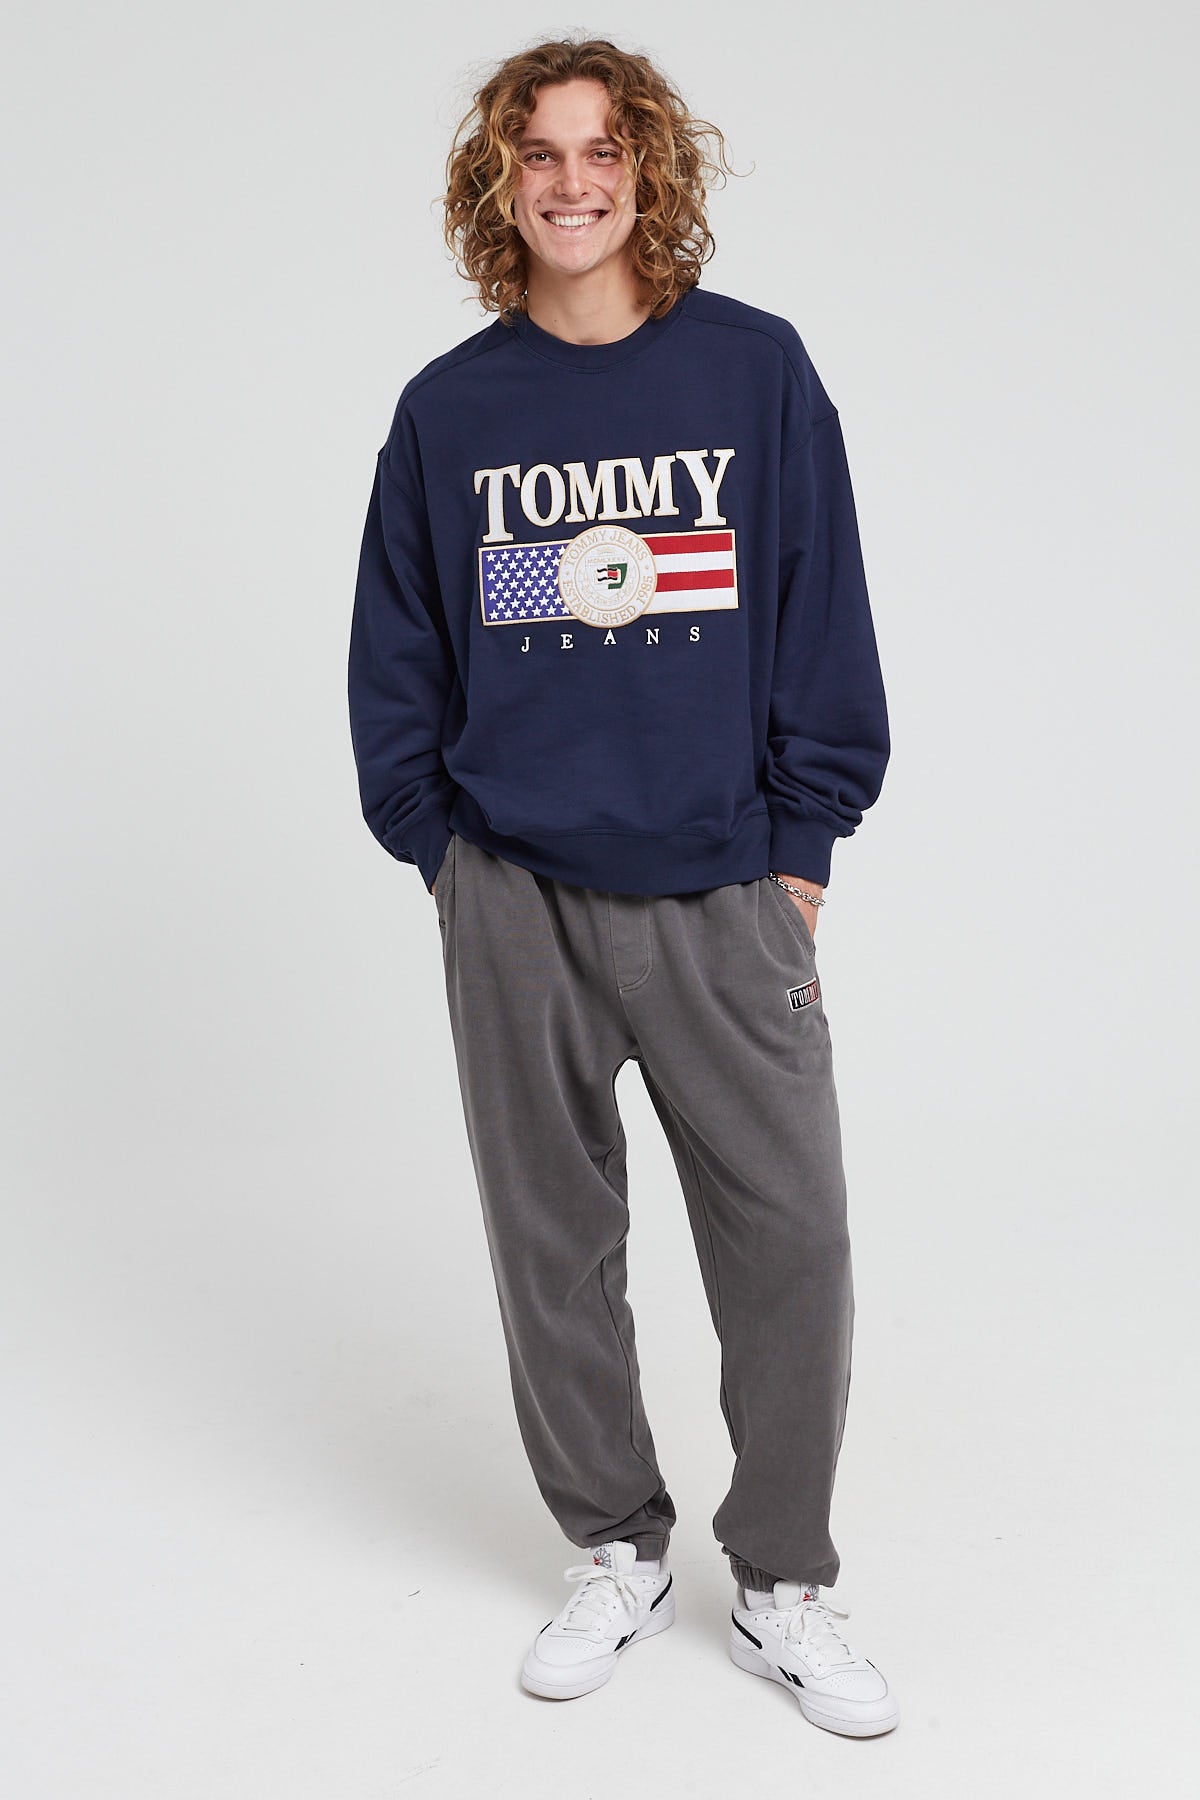 Htr – Store Luxe TJ RLX Universal Sweatpant Tommy Jeans Silver Grey TJM